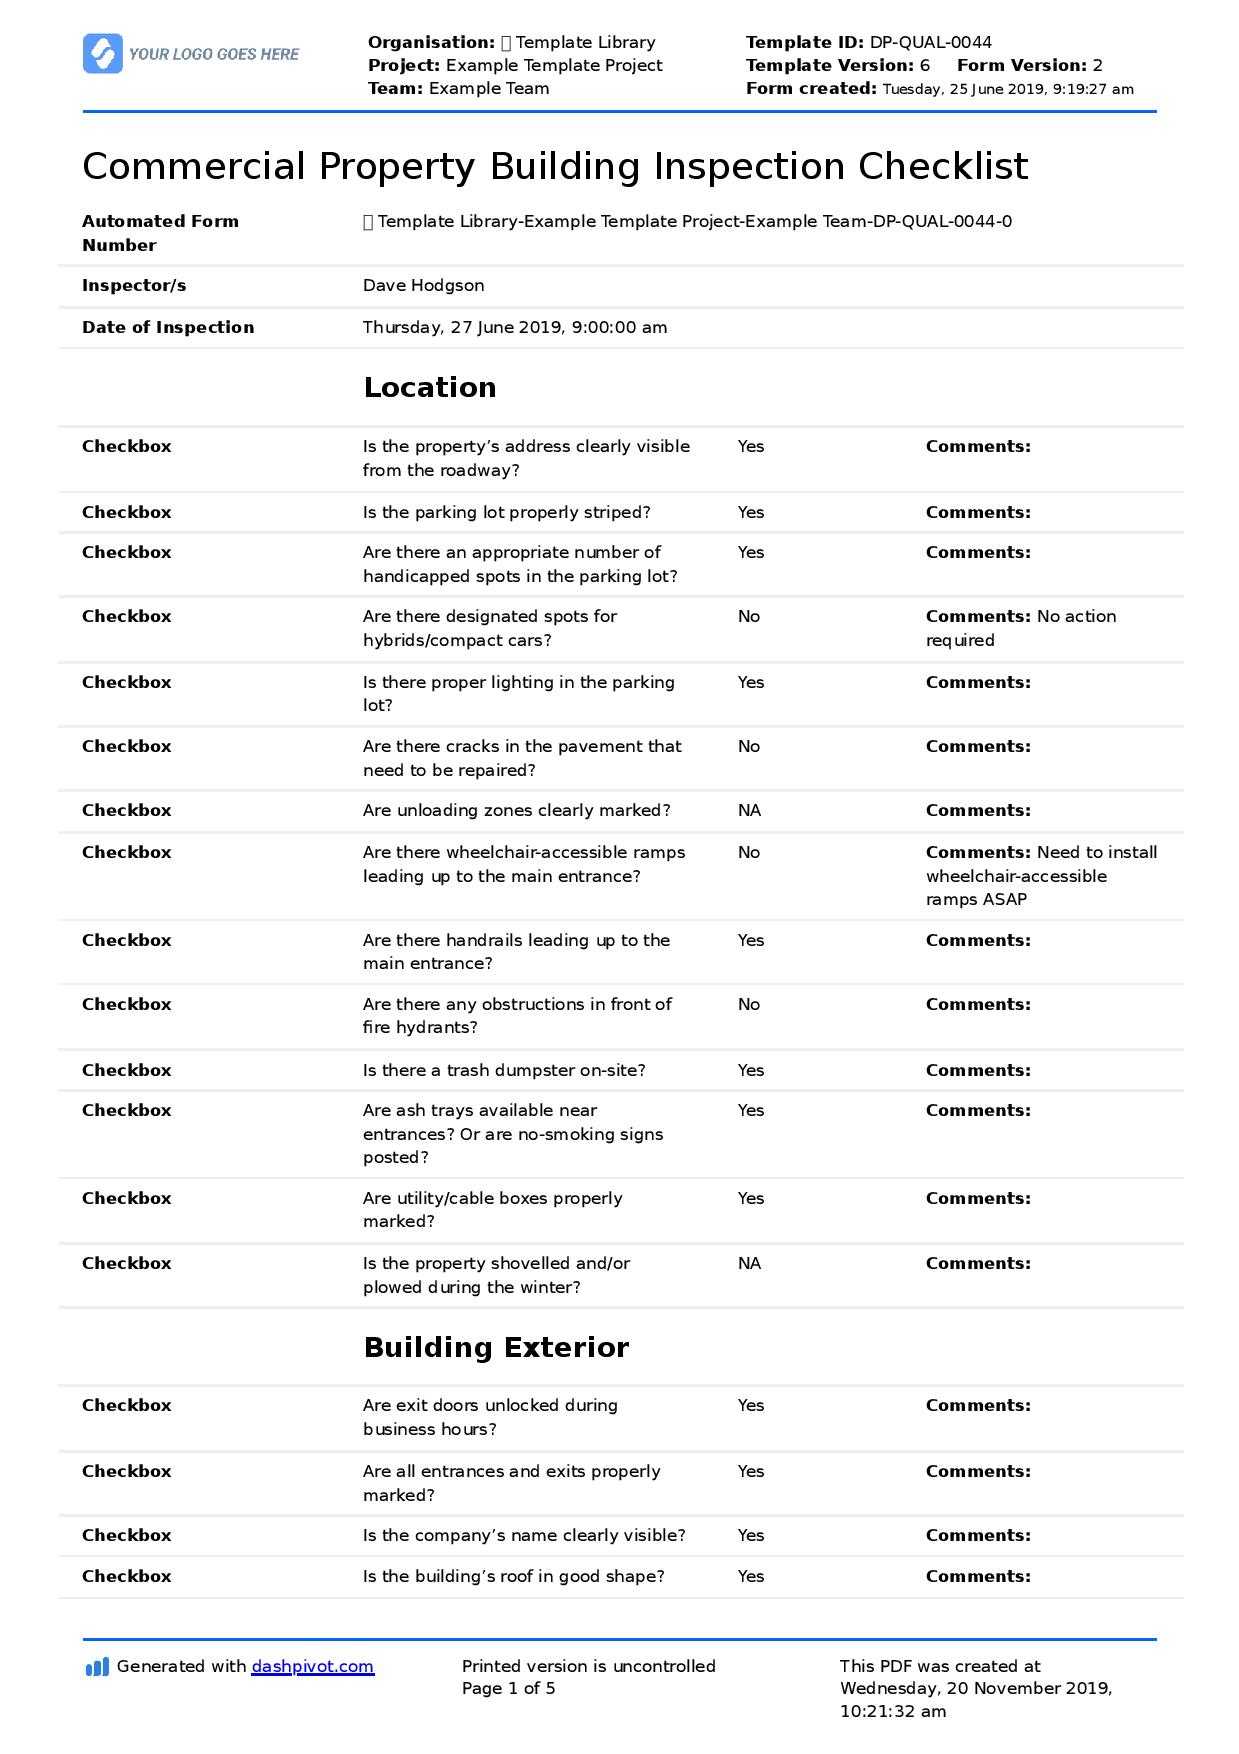 Commercial Building Inspection Checklist: Quicker + Easier For Commercial Property Inspection Report Template